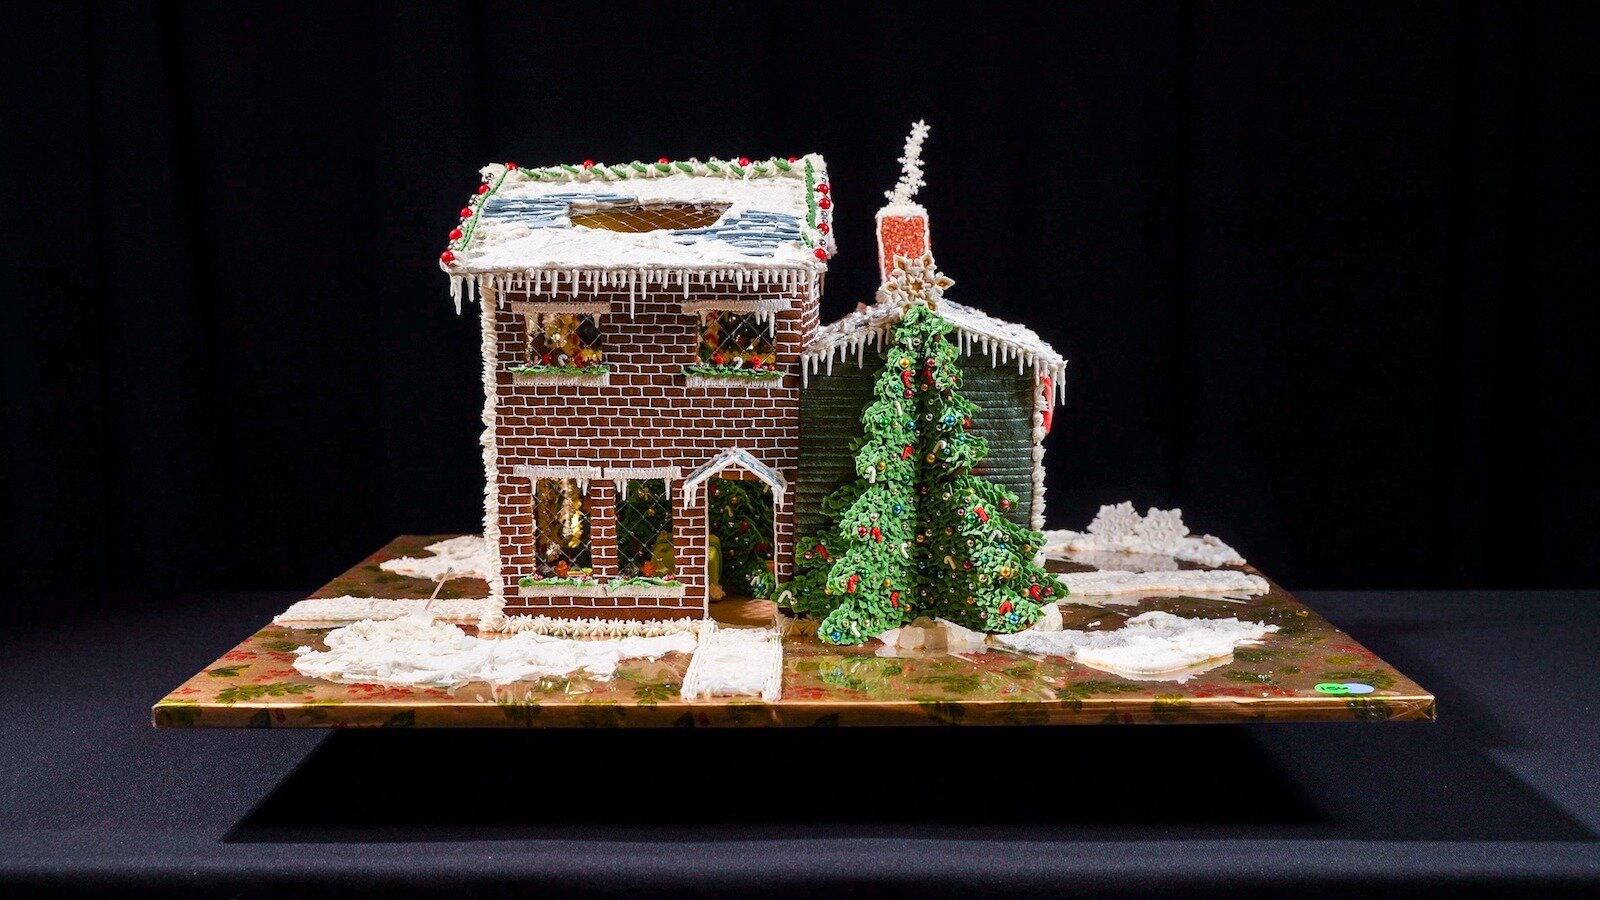 The Festival of Gingerbread 2022 started the day after Thanksgiving and runs through December 18.